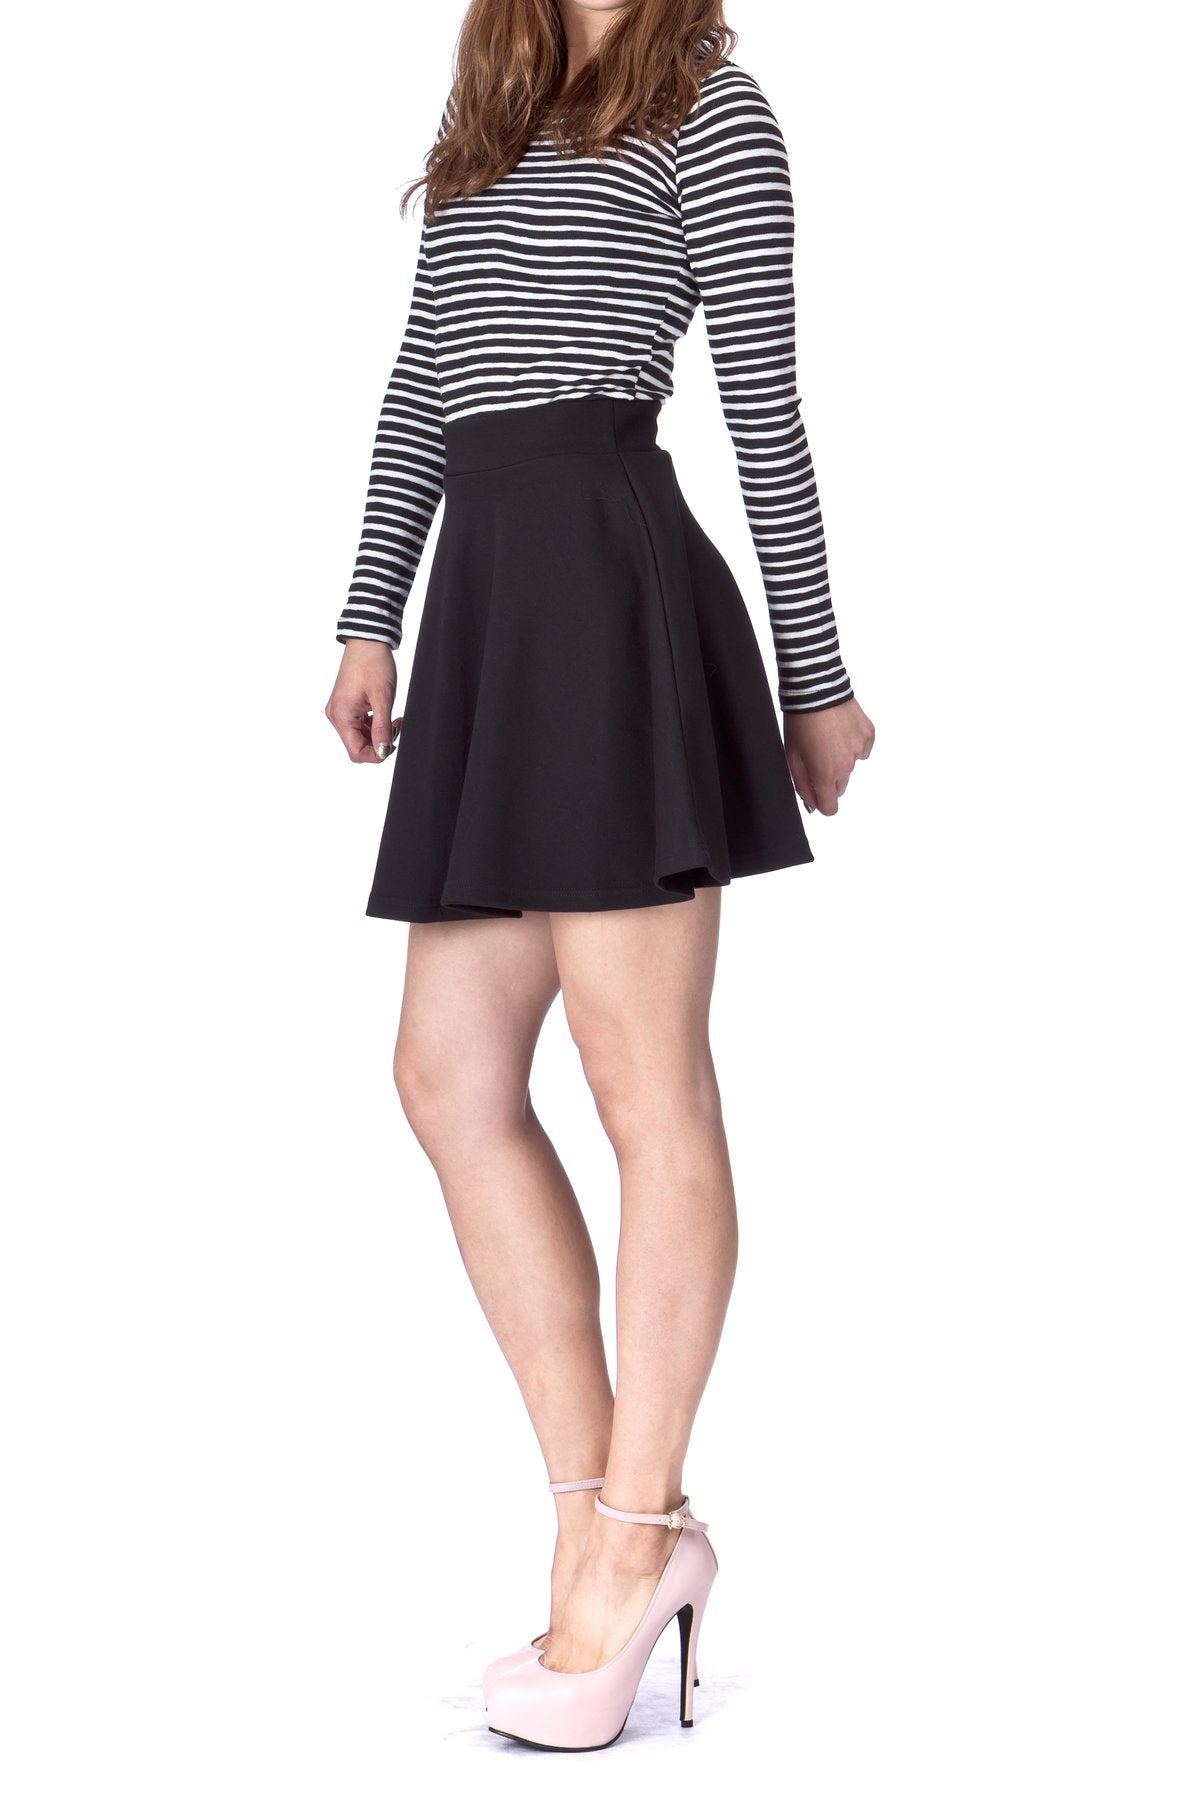 Basic Solid Stretchy Cotton High Waist A-line Flared Casual Skater Mini  Skirt (XS, Black) at  Women's Clothing store